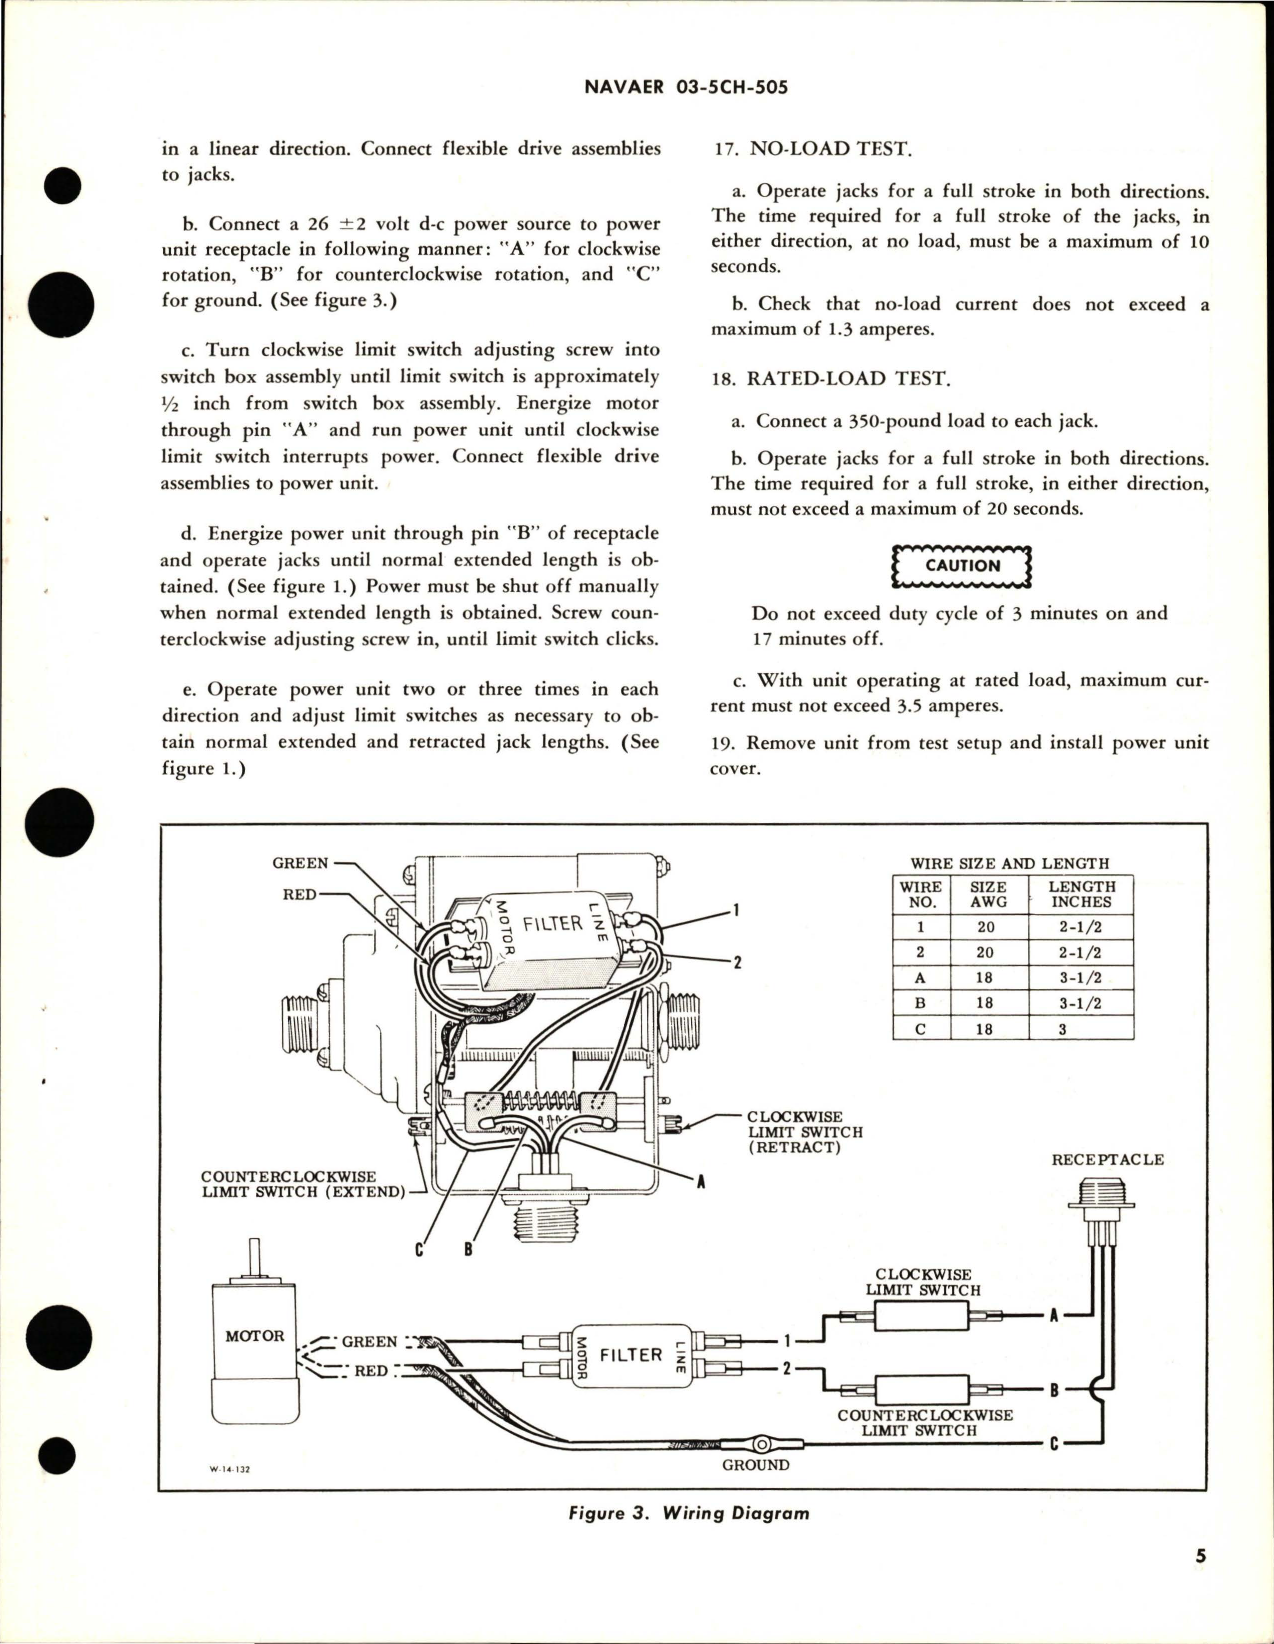 Sample page 5 from AirCorps Library document: Overhaul Instructions with Parts Breakdown for Oil Cooler Flap Temperature Control, Linear Jacks and Power Unit 